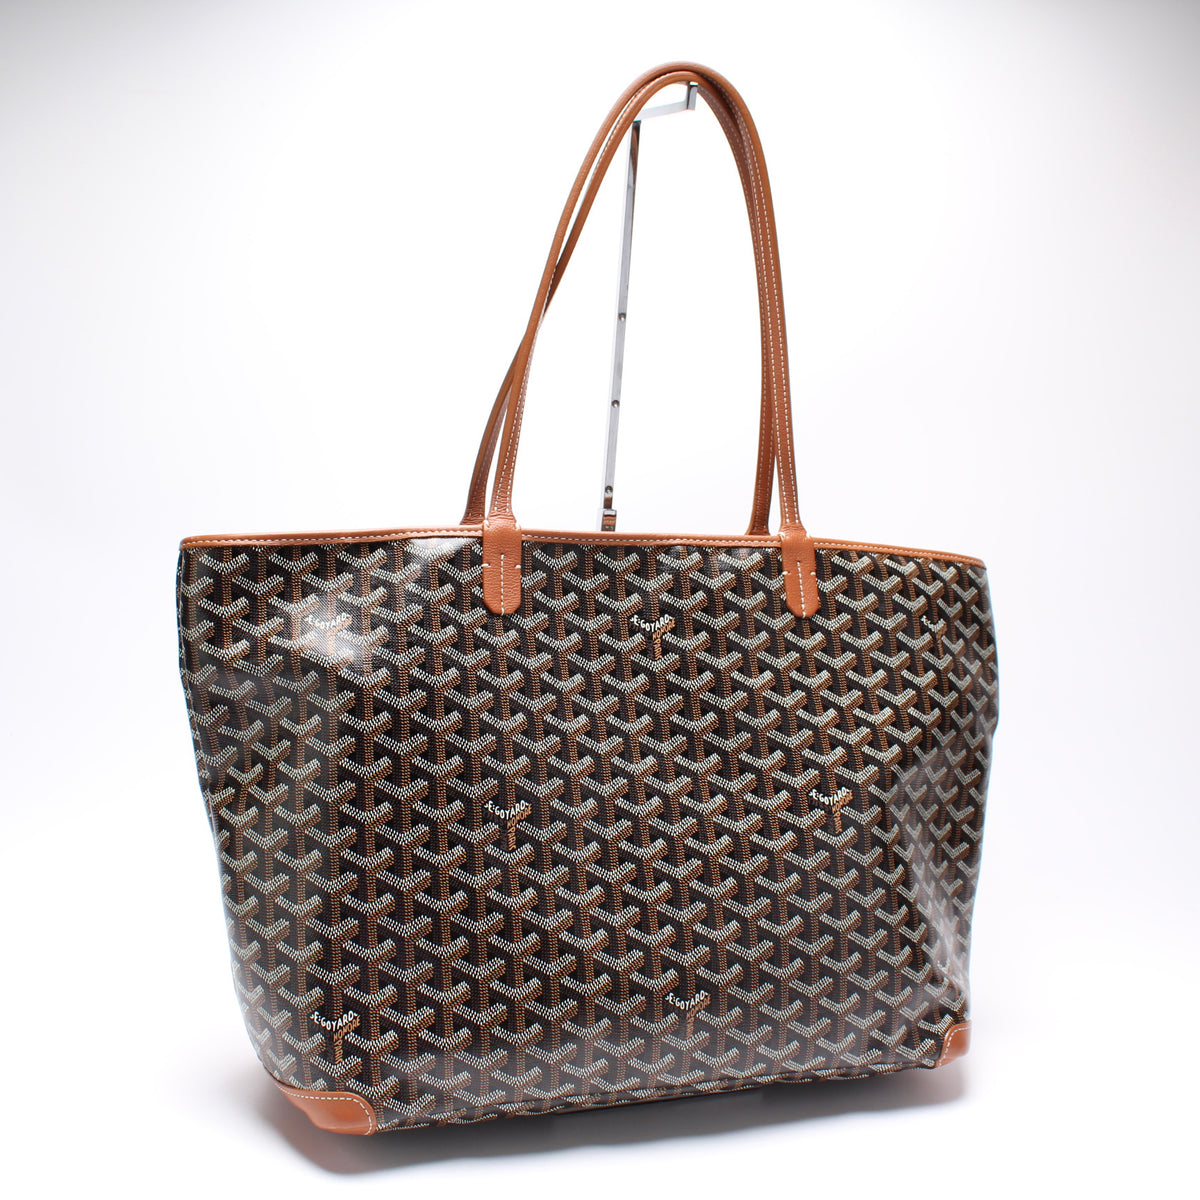 Another Special request - Goyard 'Artois MM Bag' in the classic